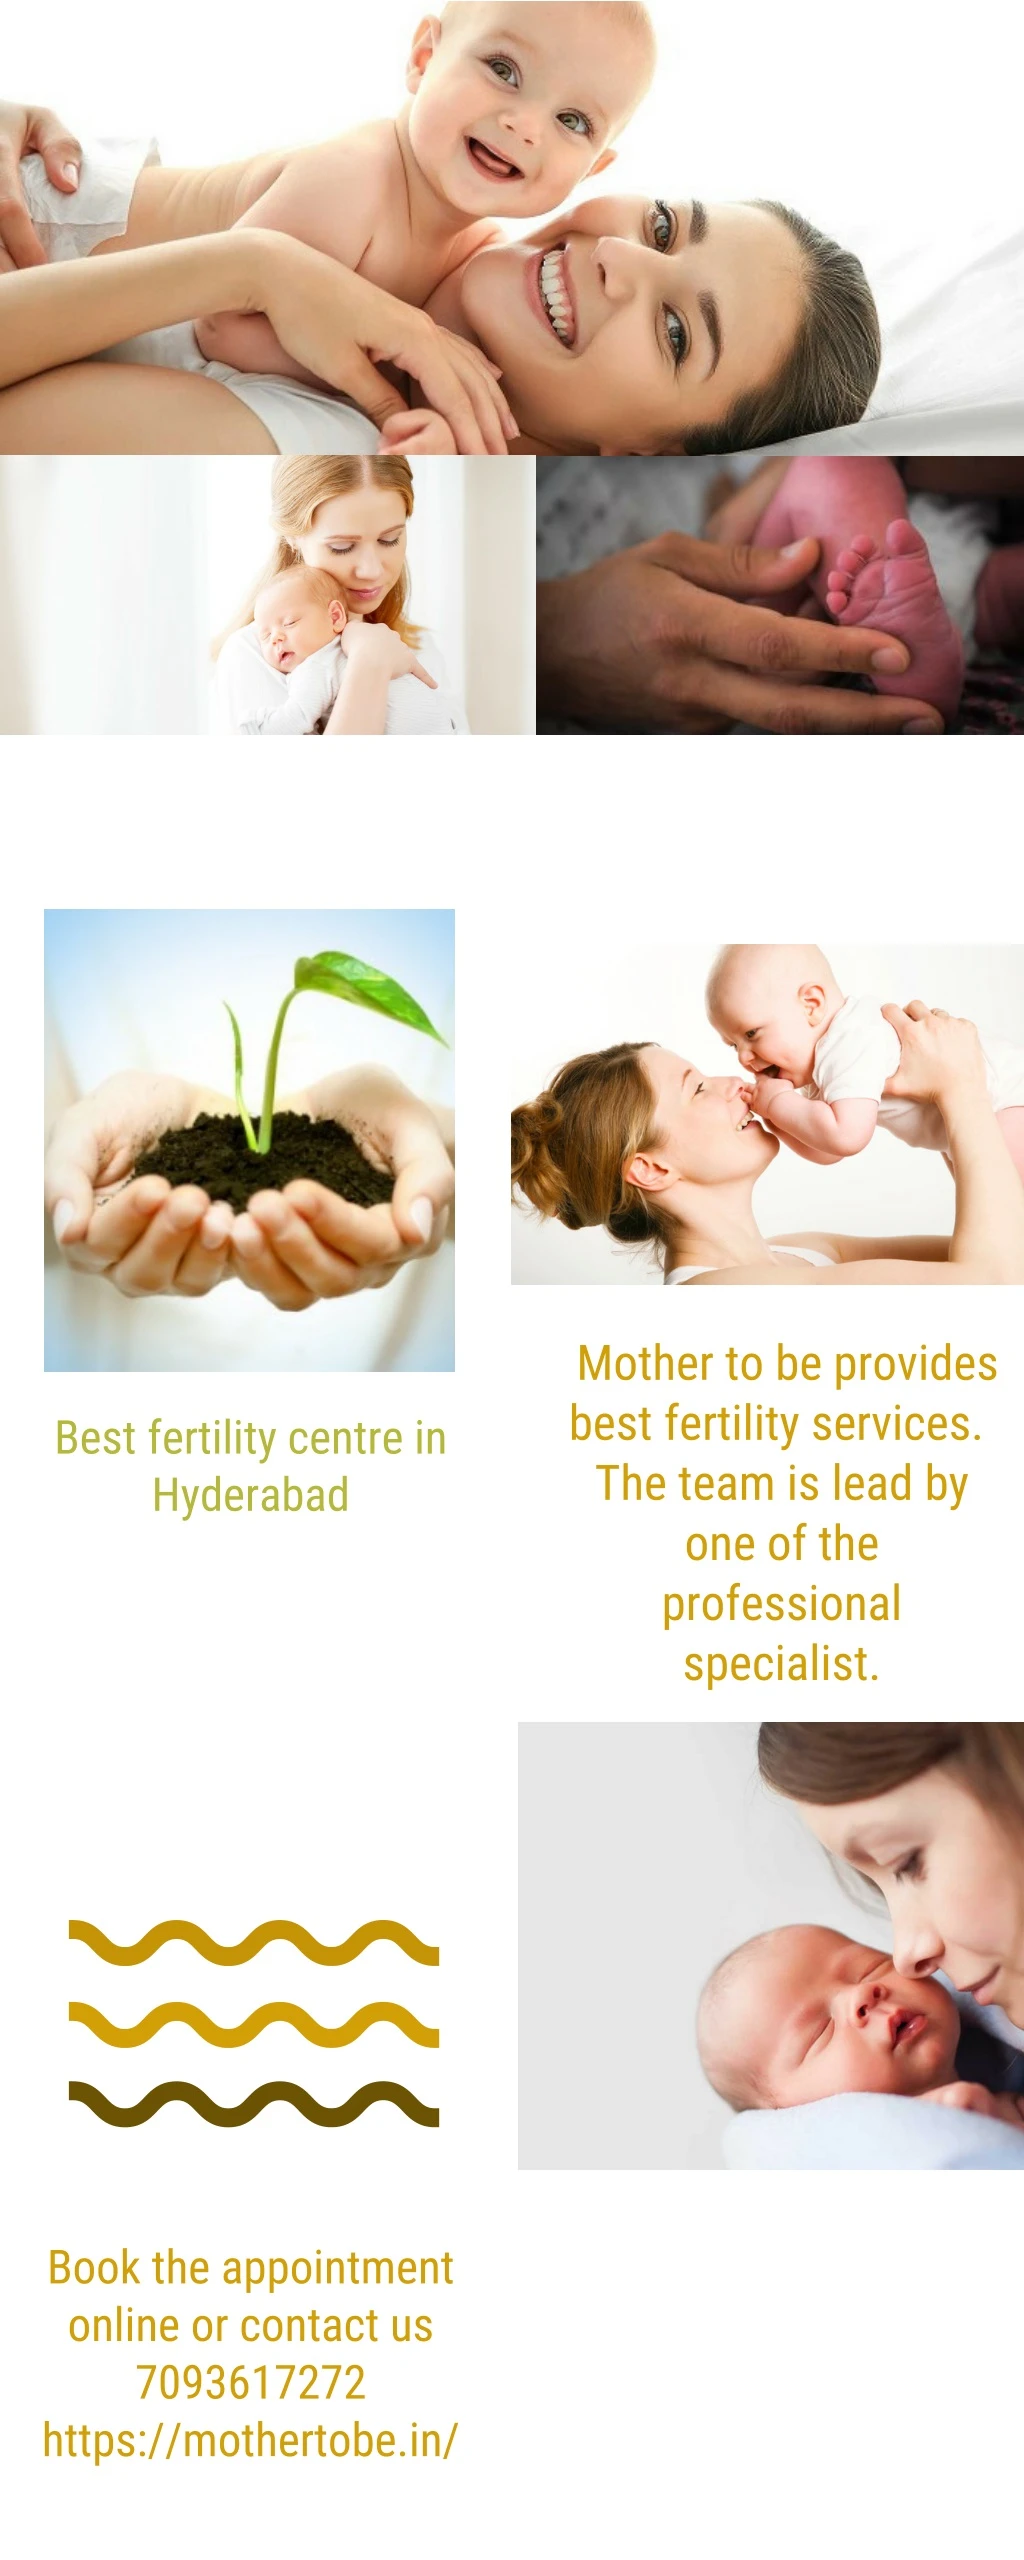 mother to be provides best fertility services